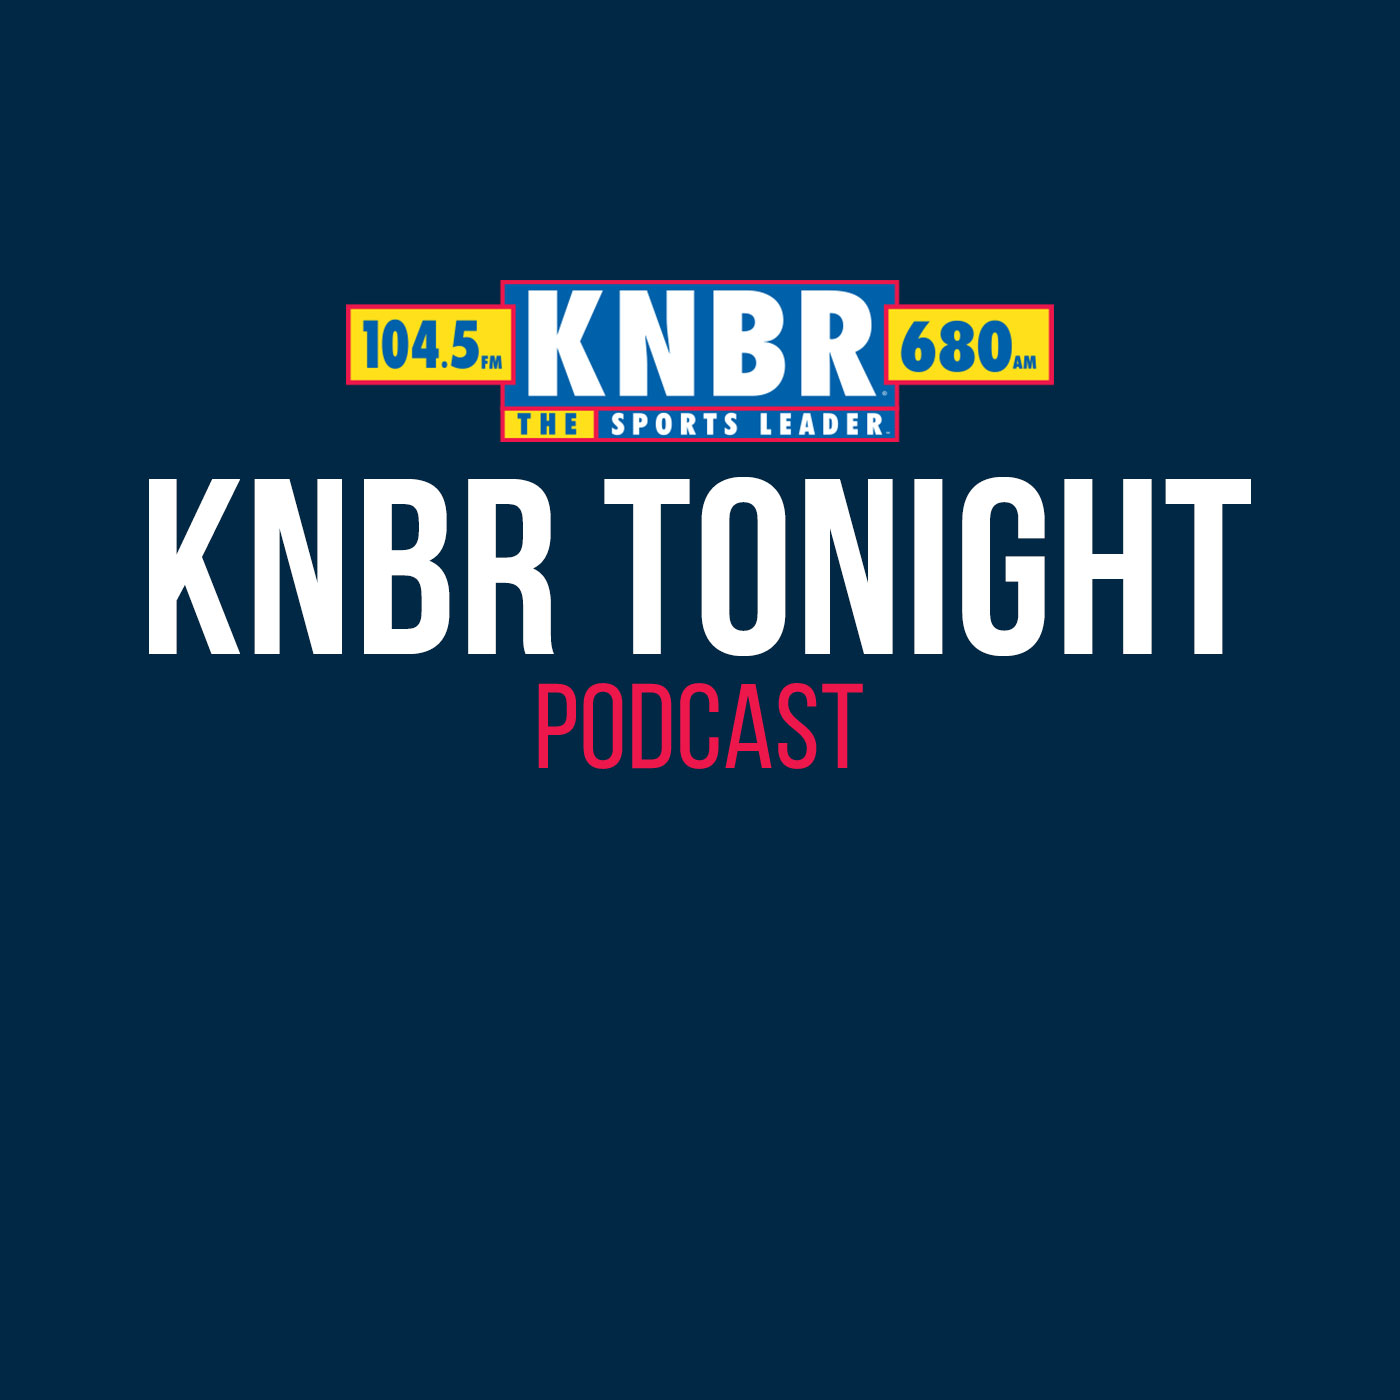 10-28 Sean Highkin joins KNBR Tonight with Christopher Gabriel to talk about Warriors season so far and Is KD happy playing for the Brooklyn Nets?